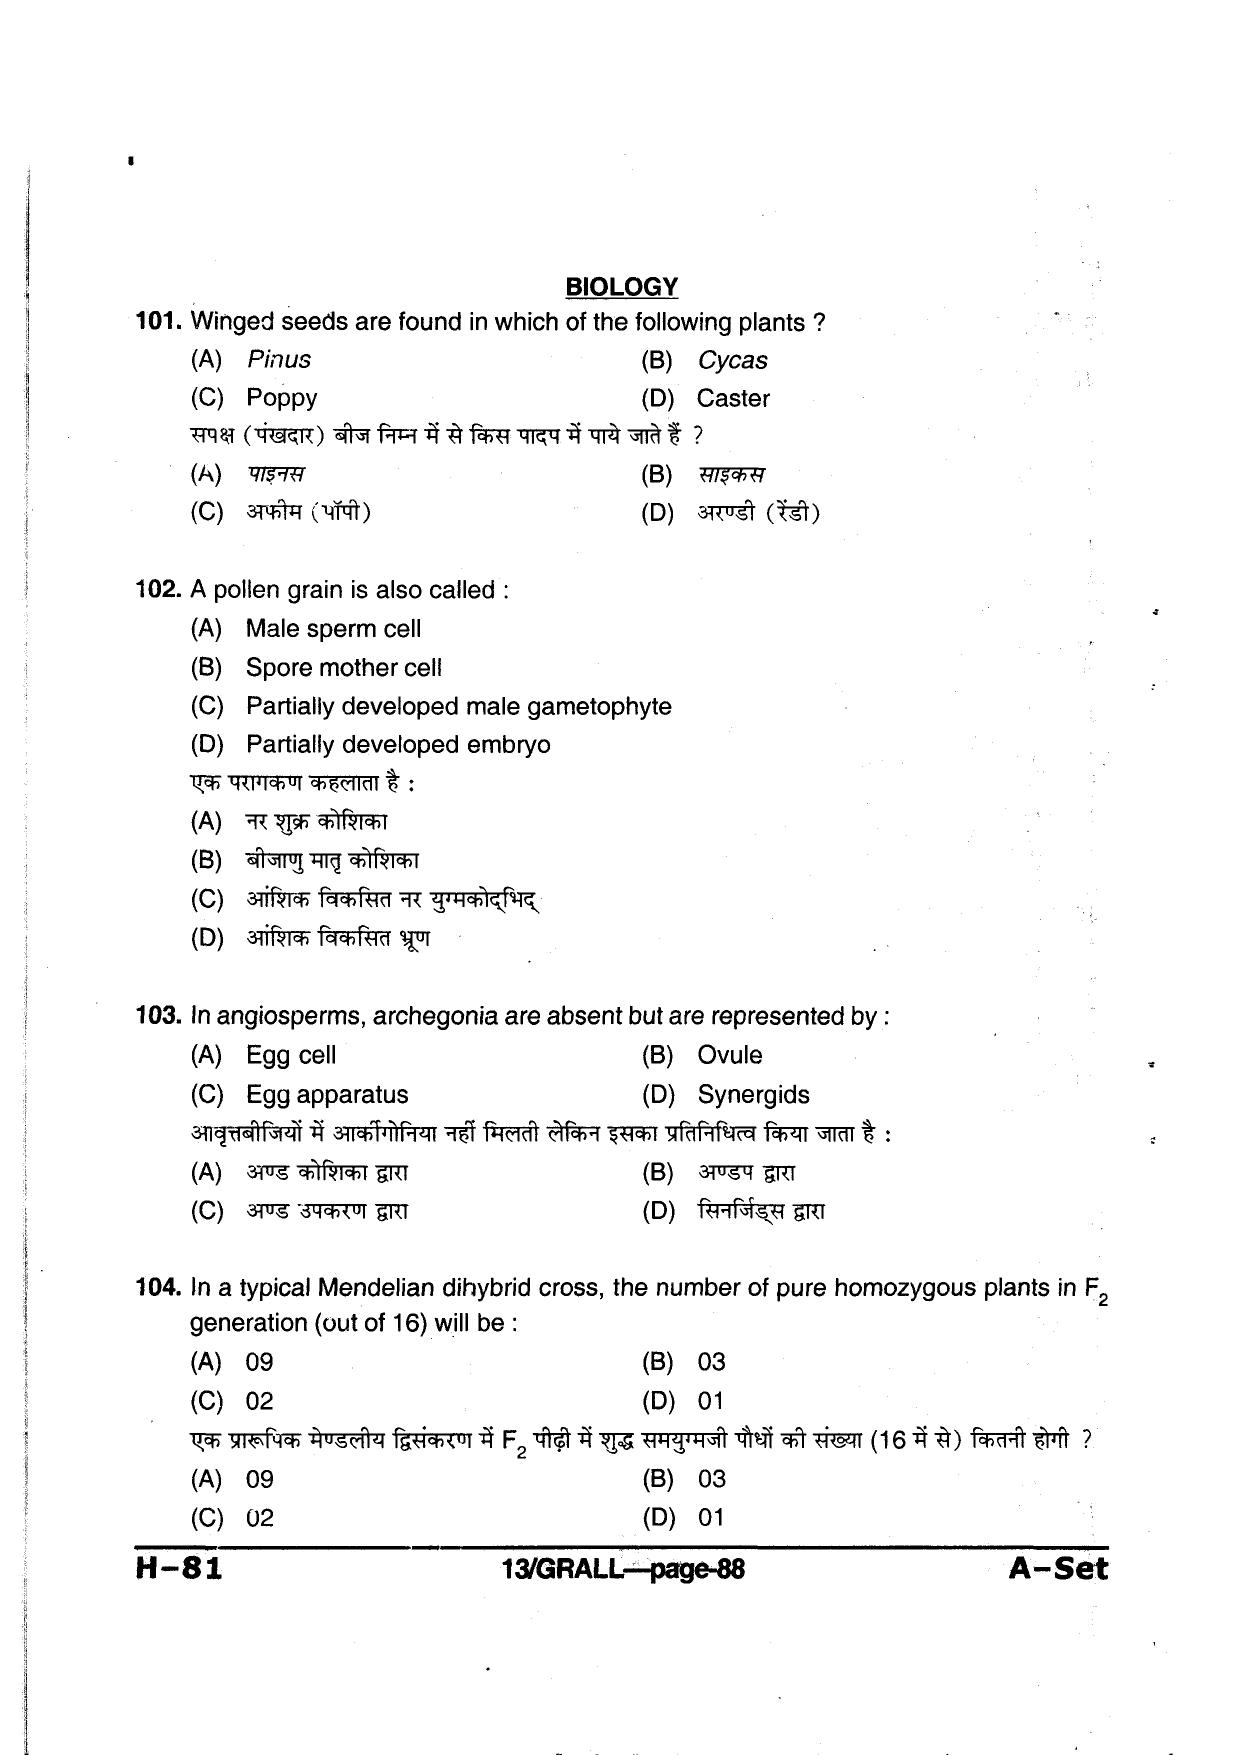 MP PAT 2013 Question Paper - Paper I - Page 88